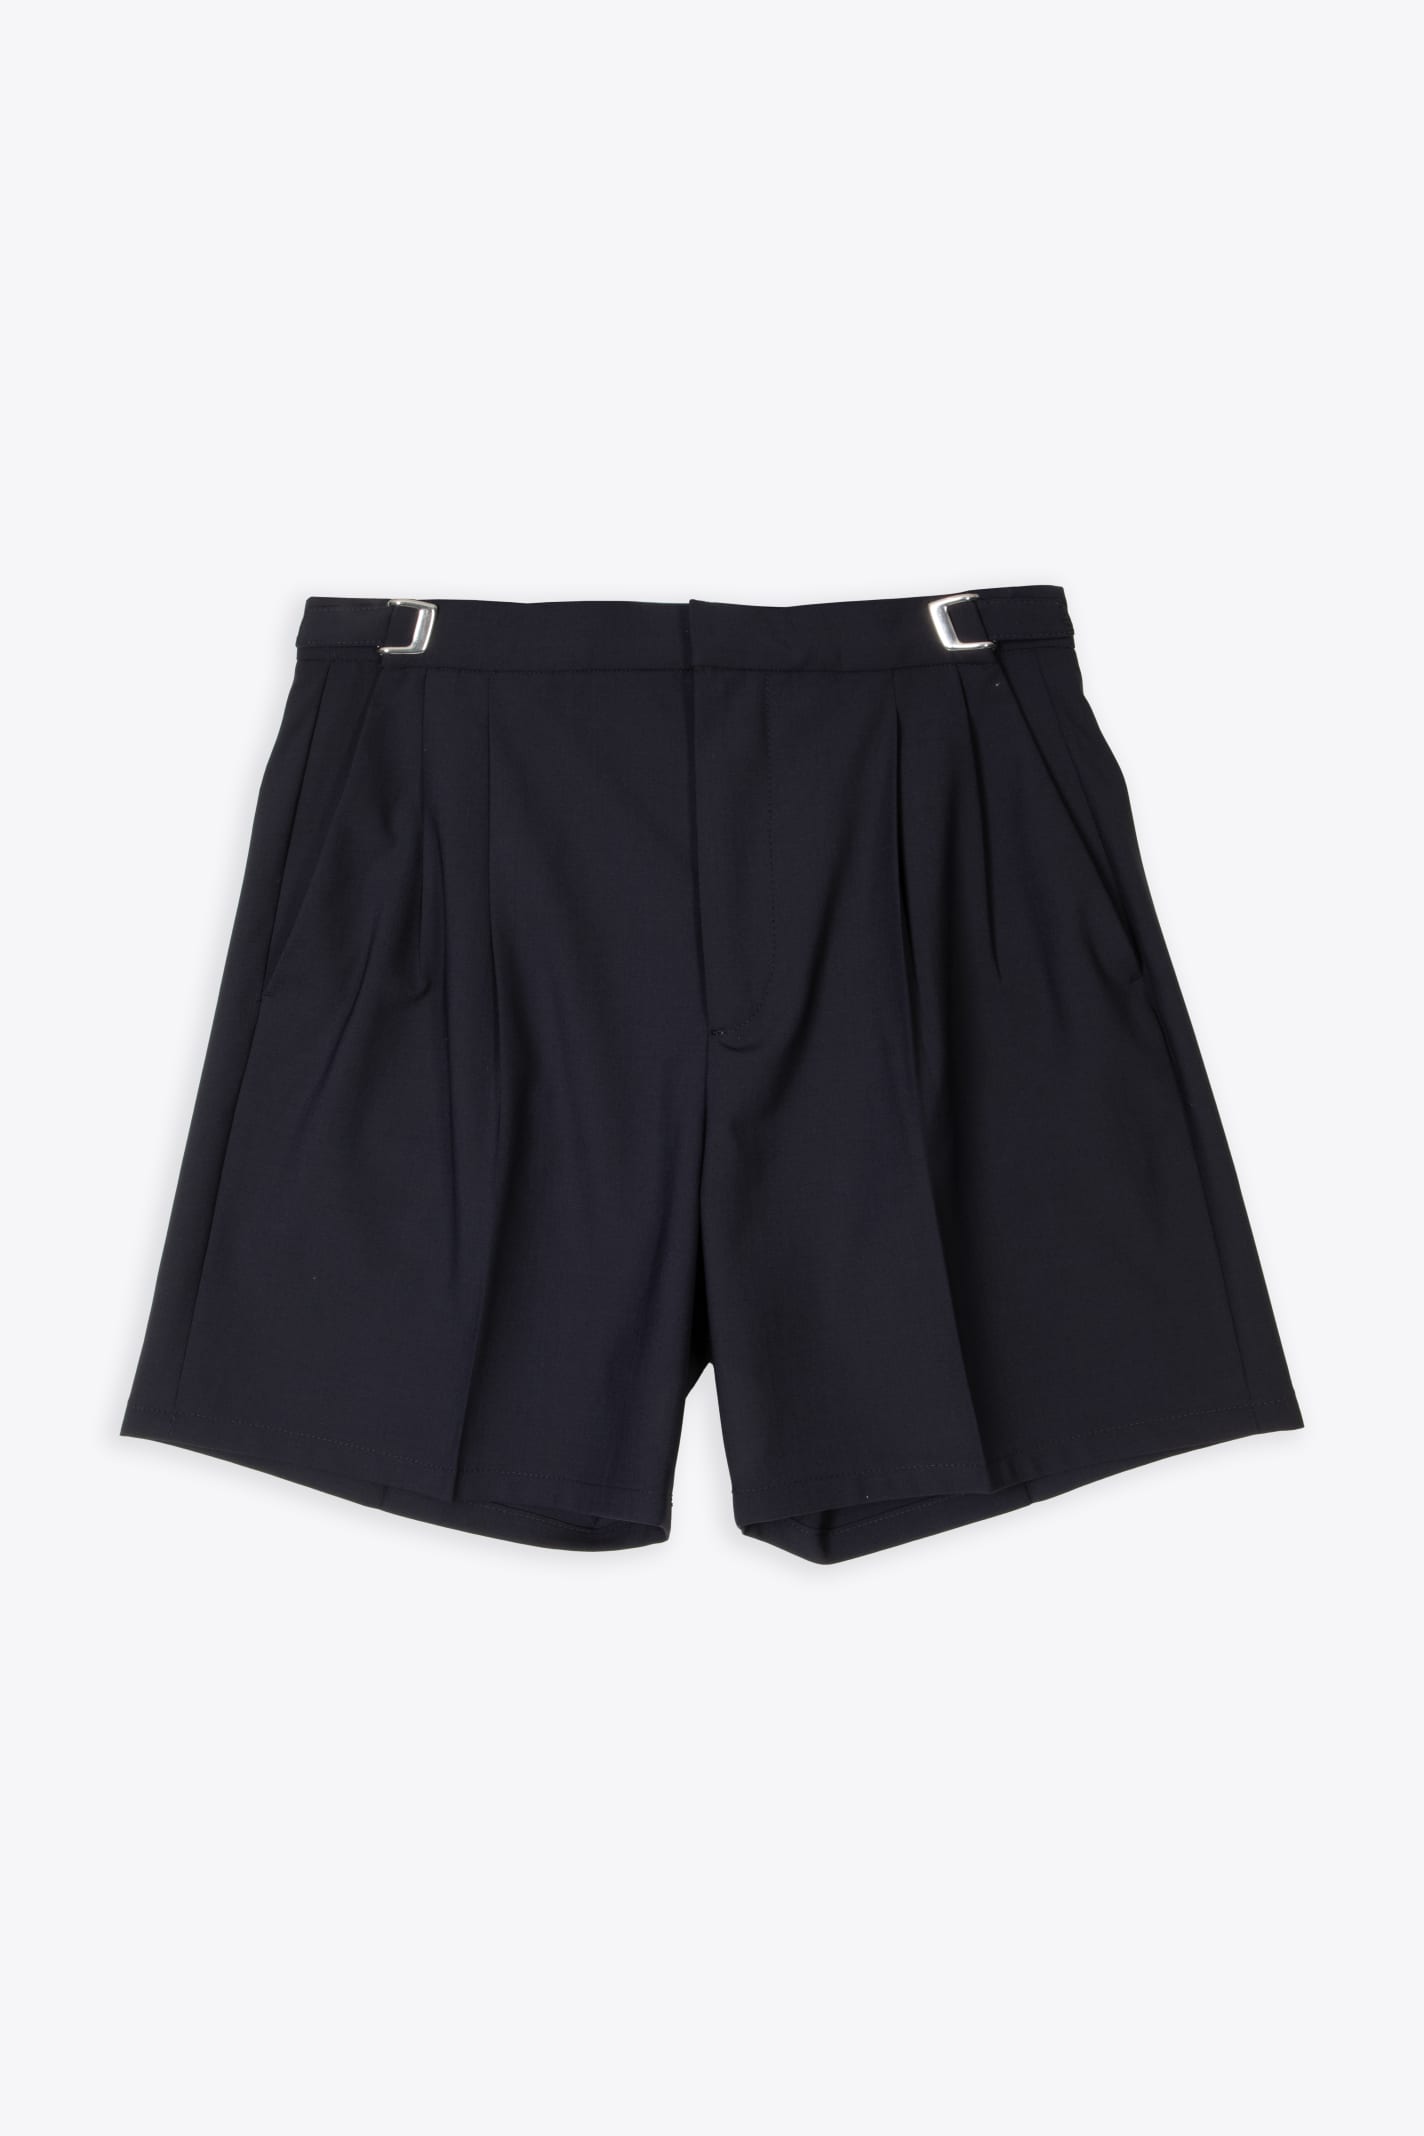 Cellar Door Leo T Short Navy blue tailored short with adjustable waistband and metal hooks - Leo T